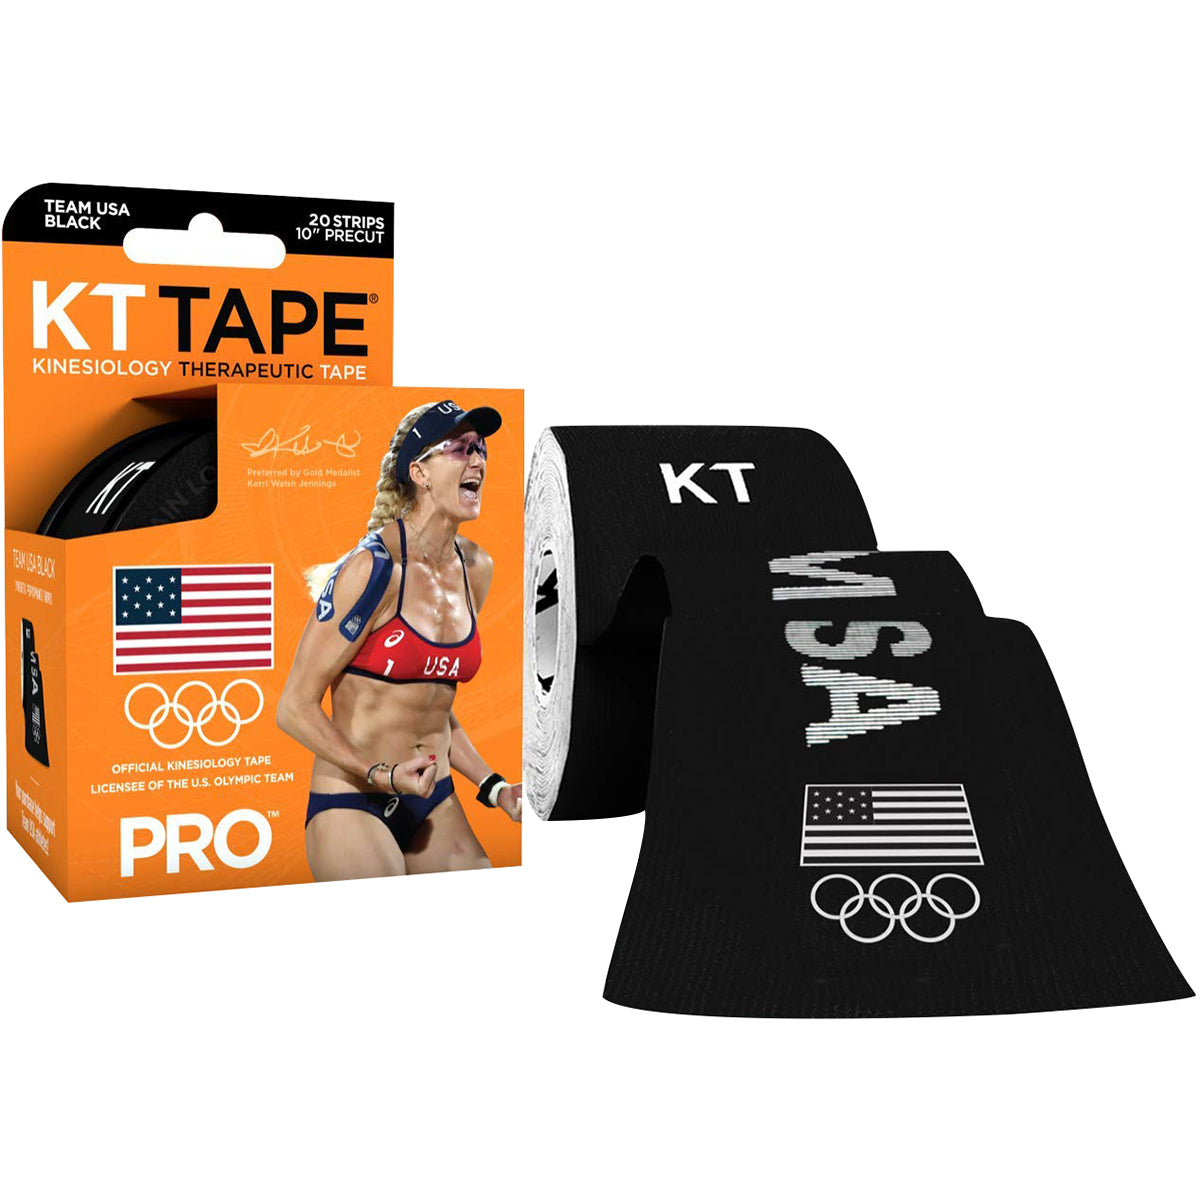 KT Tape Pro Team USA 10 Precut Kinesiology Therapeutic Sports Roll - 20  Strips